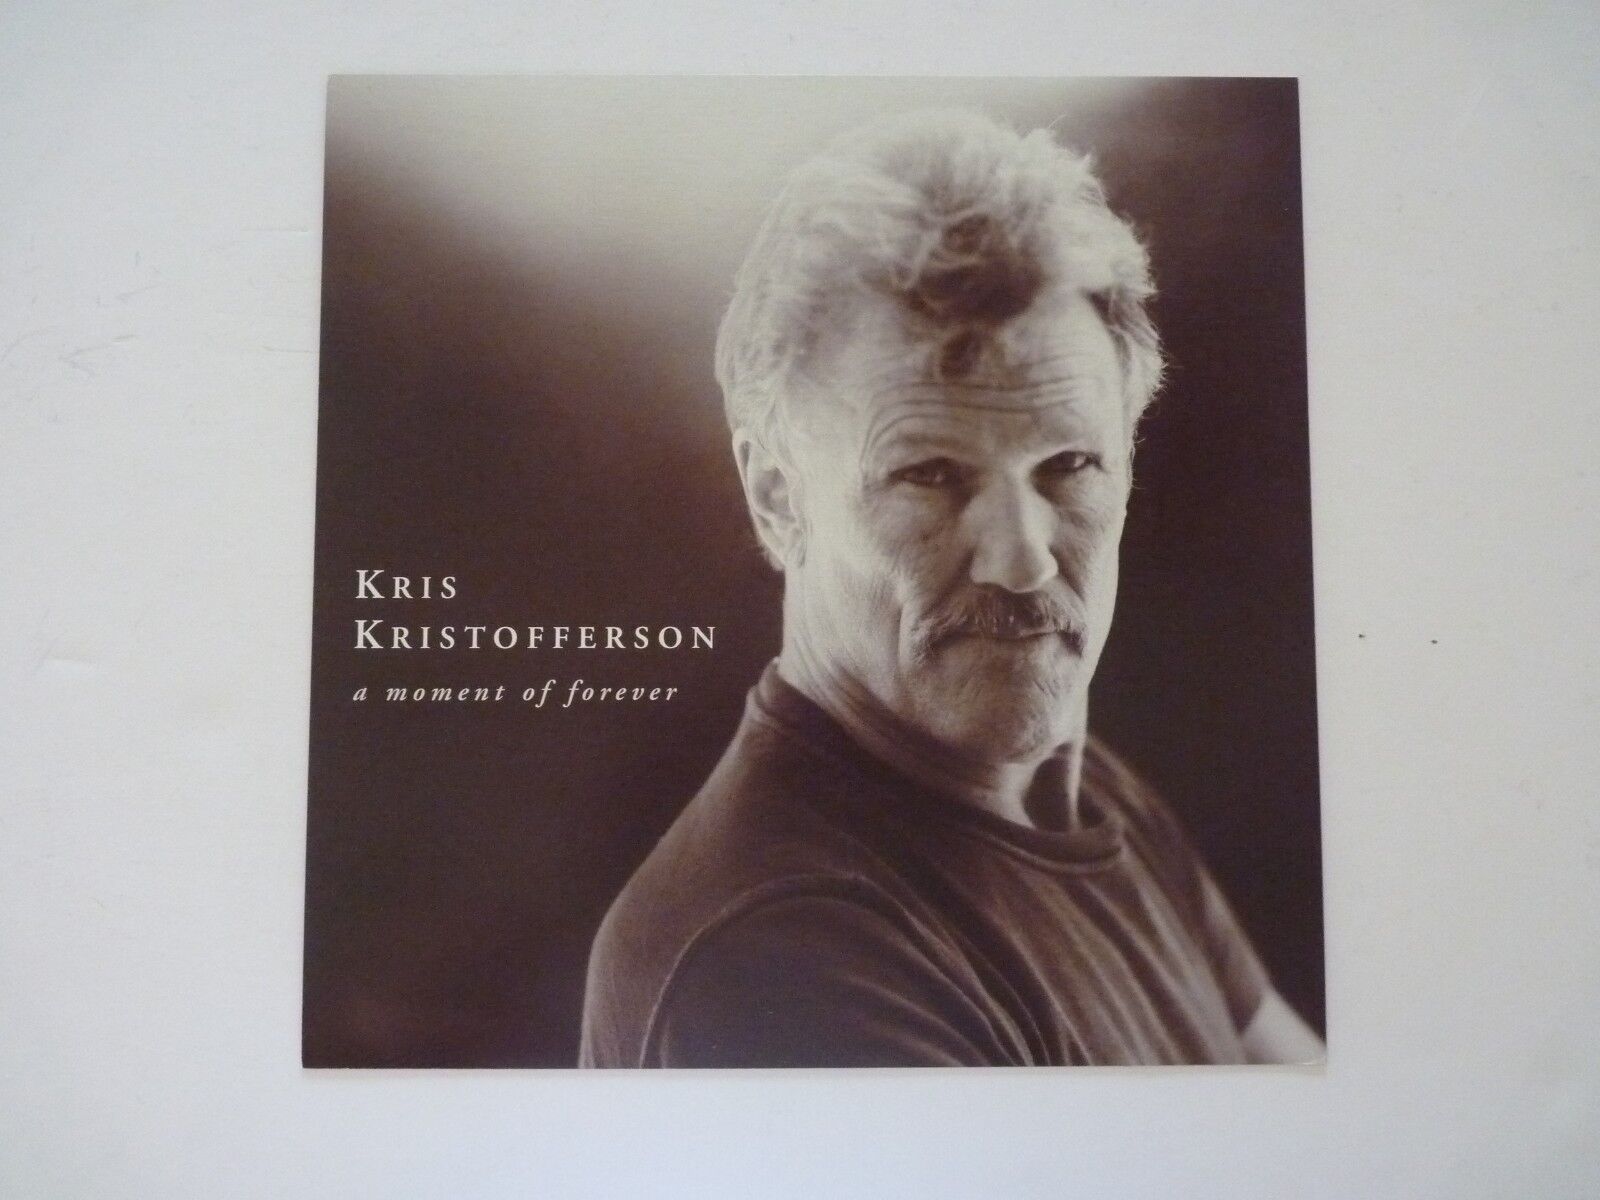 Kris Kristofferson Moment of Forever LP Record Photo Poster painting Flat 12x12 Poster